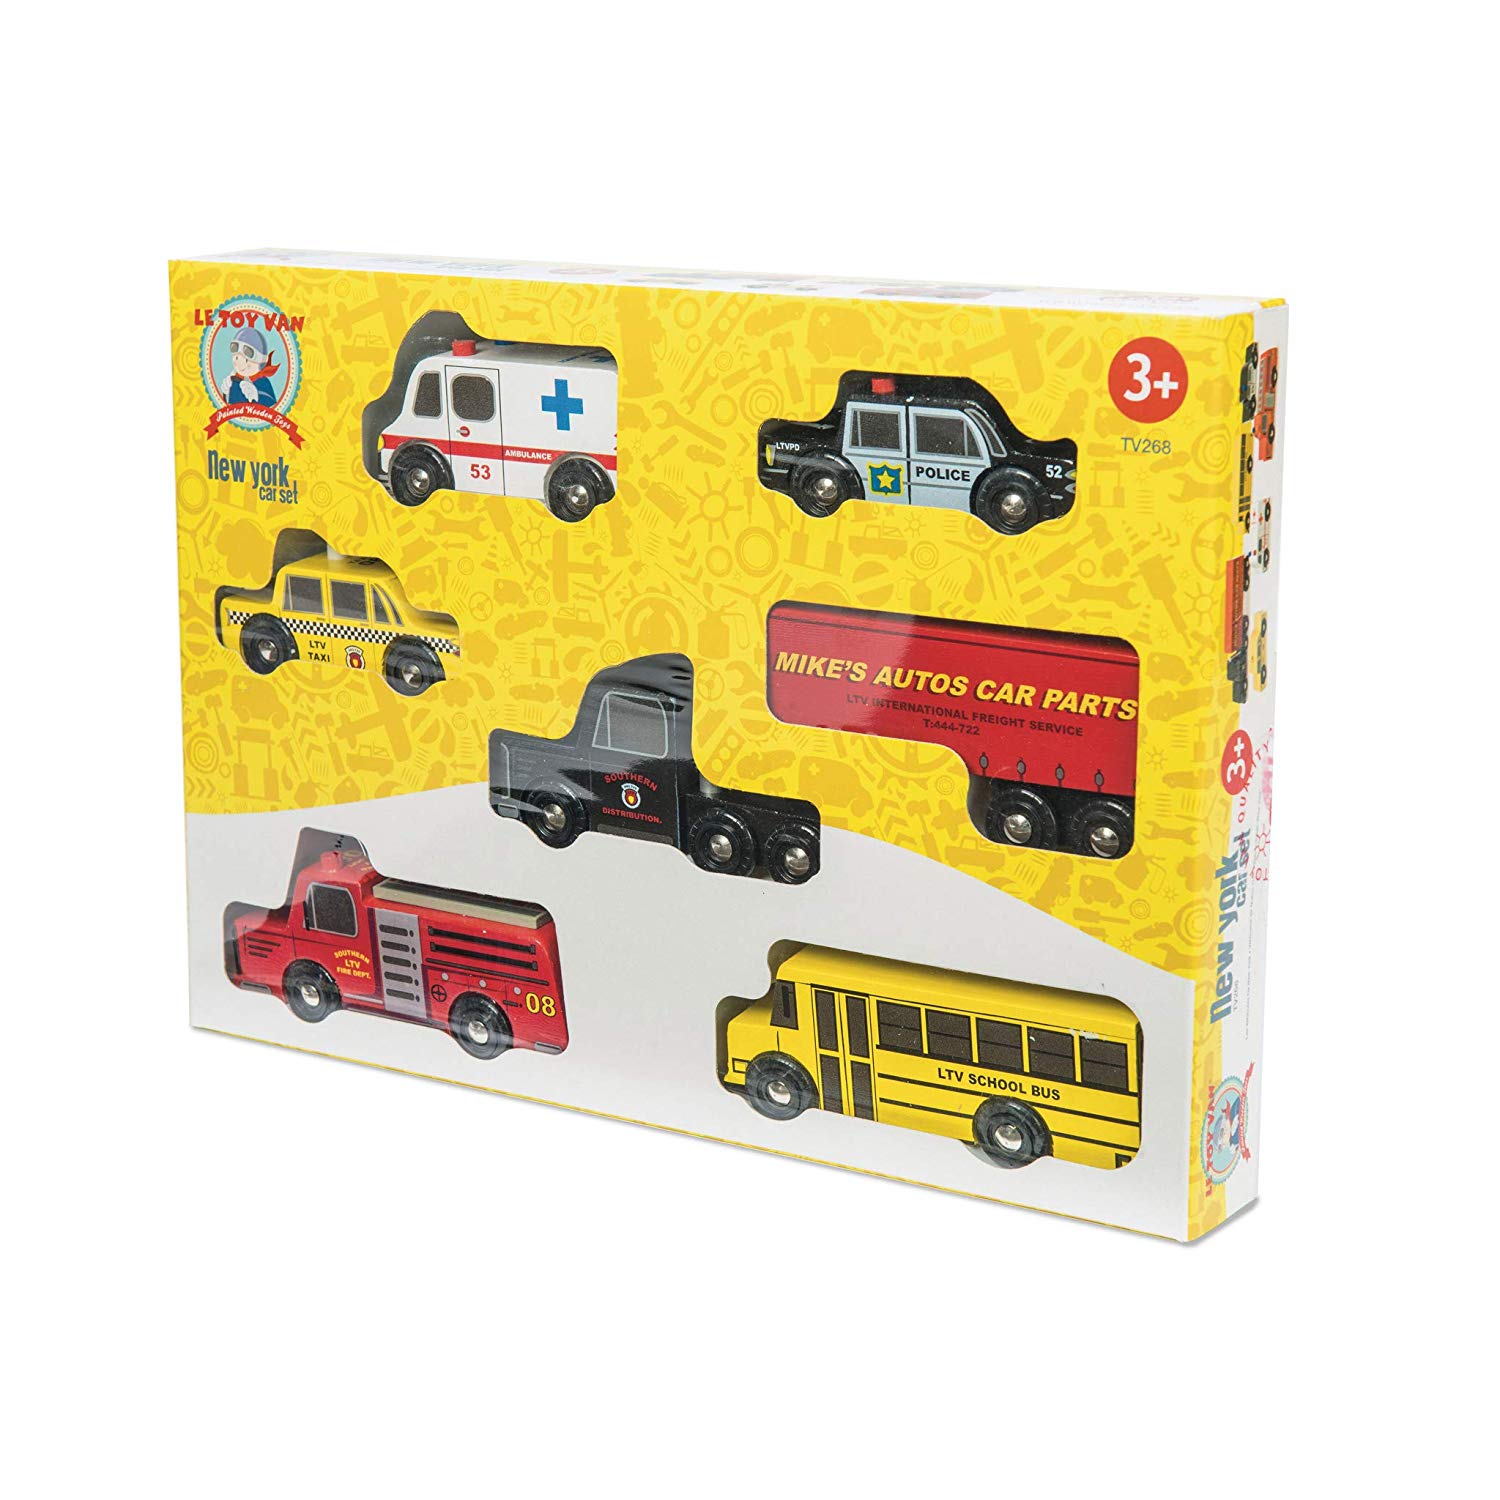 Set 7 PiecesPlay Le Toy Van Iconic Wooden London Themed Toy Car Play Set 